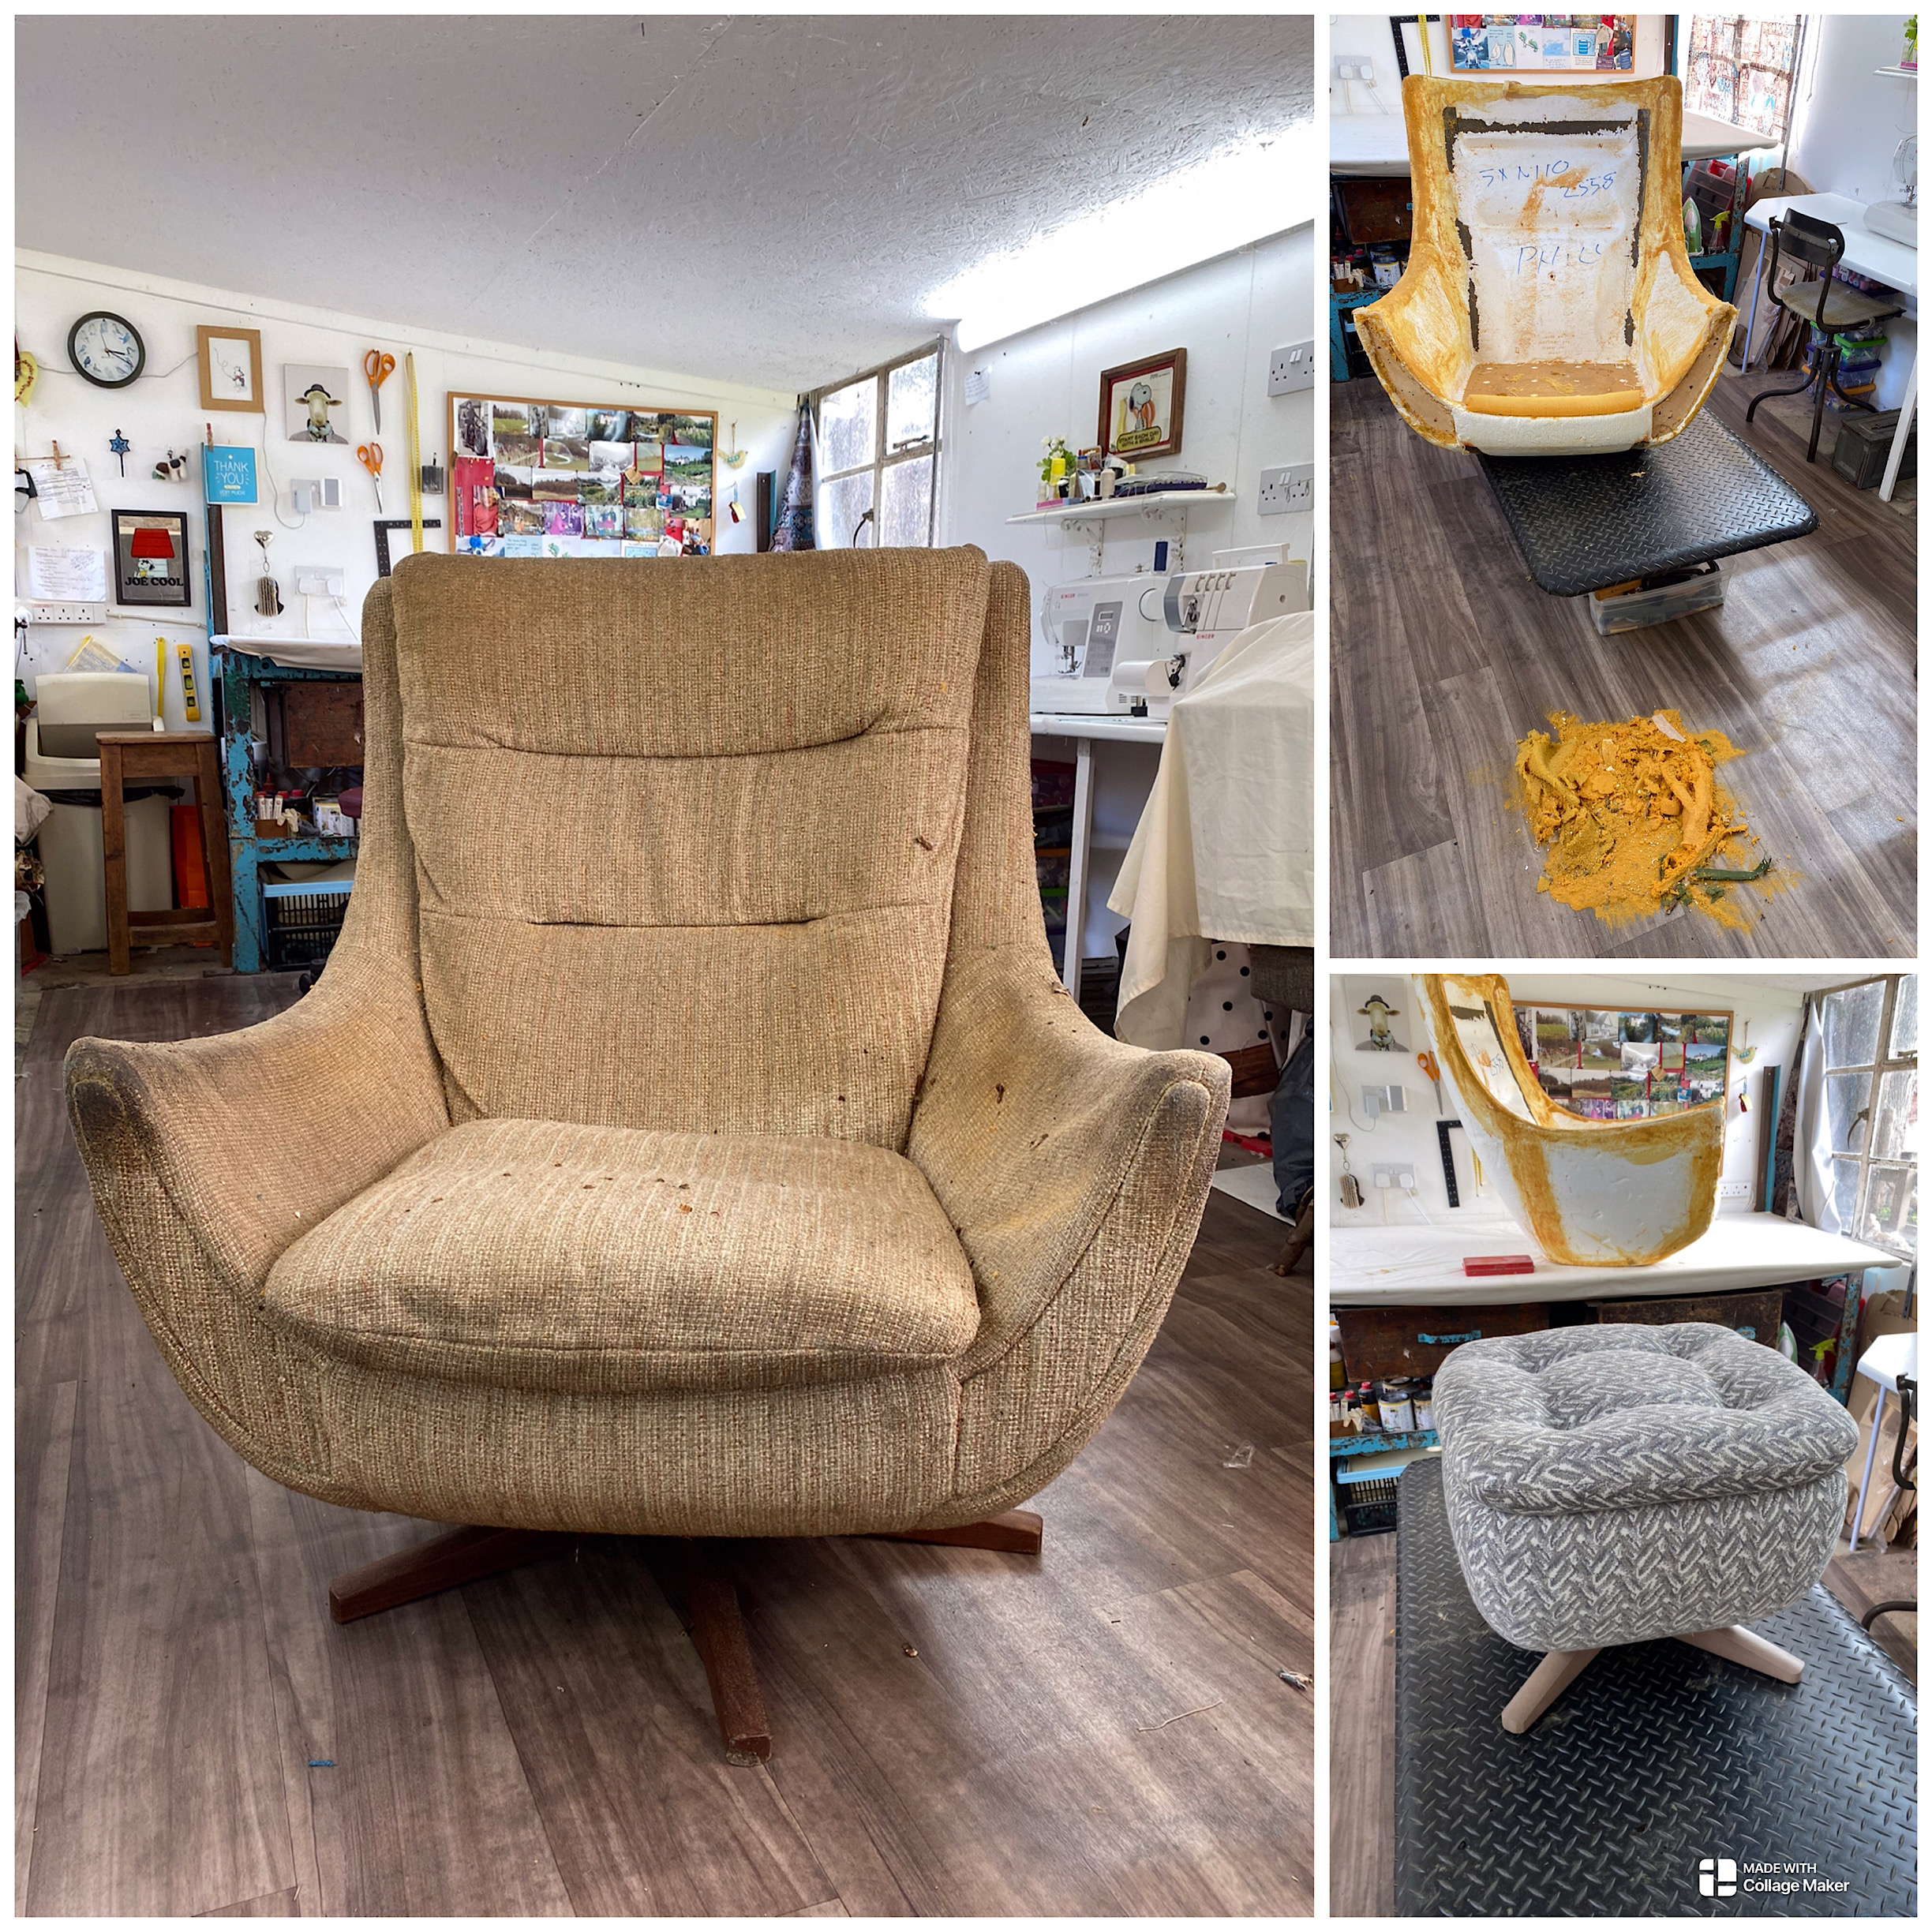 Parker Knoll PK 110/111 Chair and Footstool before refurb